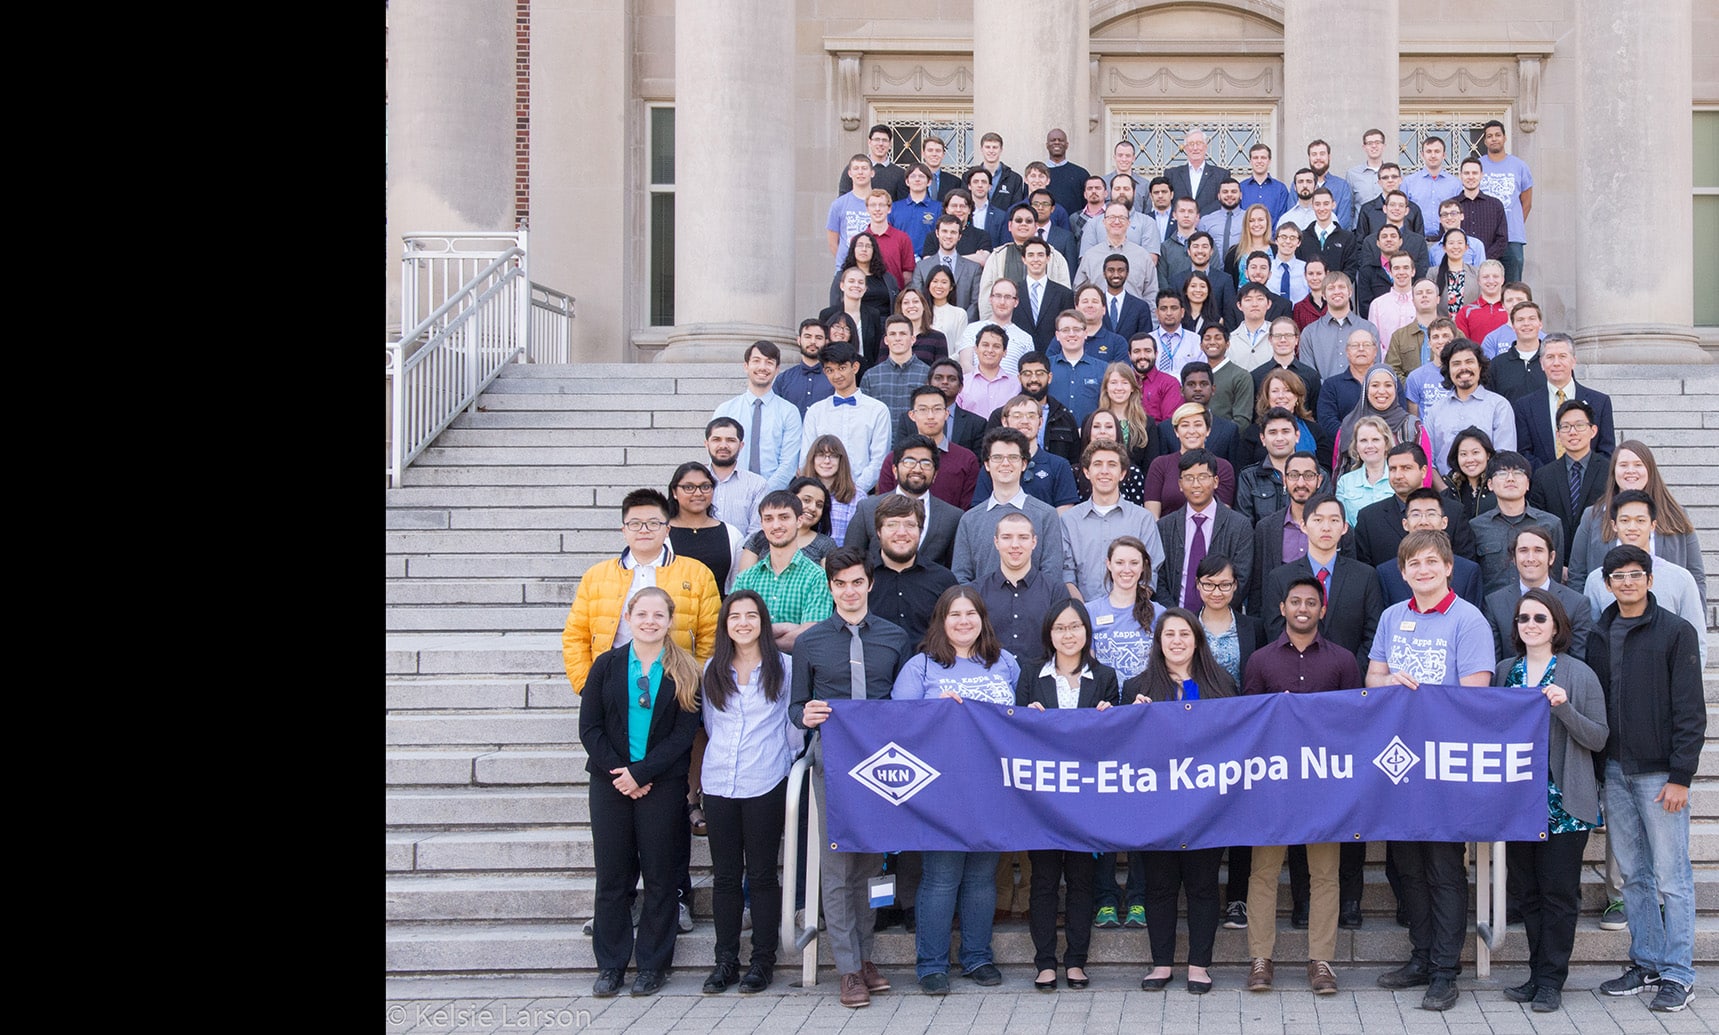 IEEE-Eta Kappa Nu (IEEE-HKN) IEEE’s Honor Society - where the importance of scholarship, character and attitude are understood and celebrated